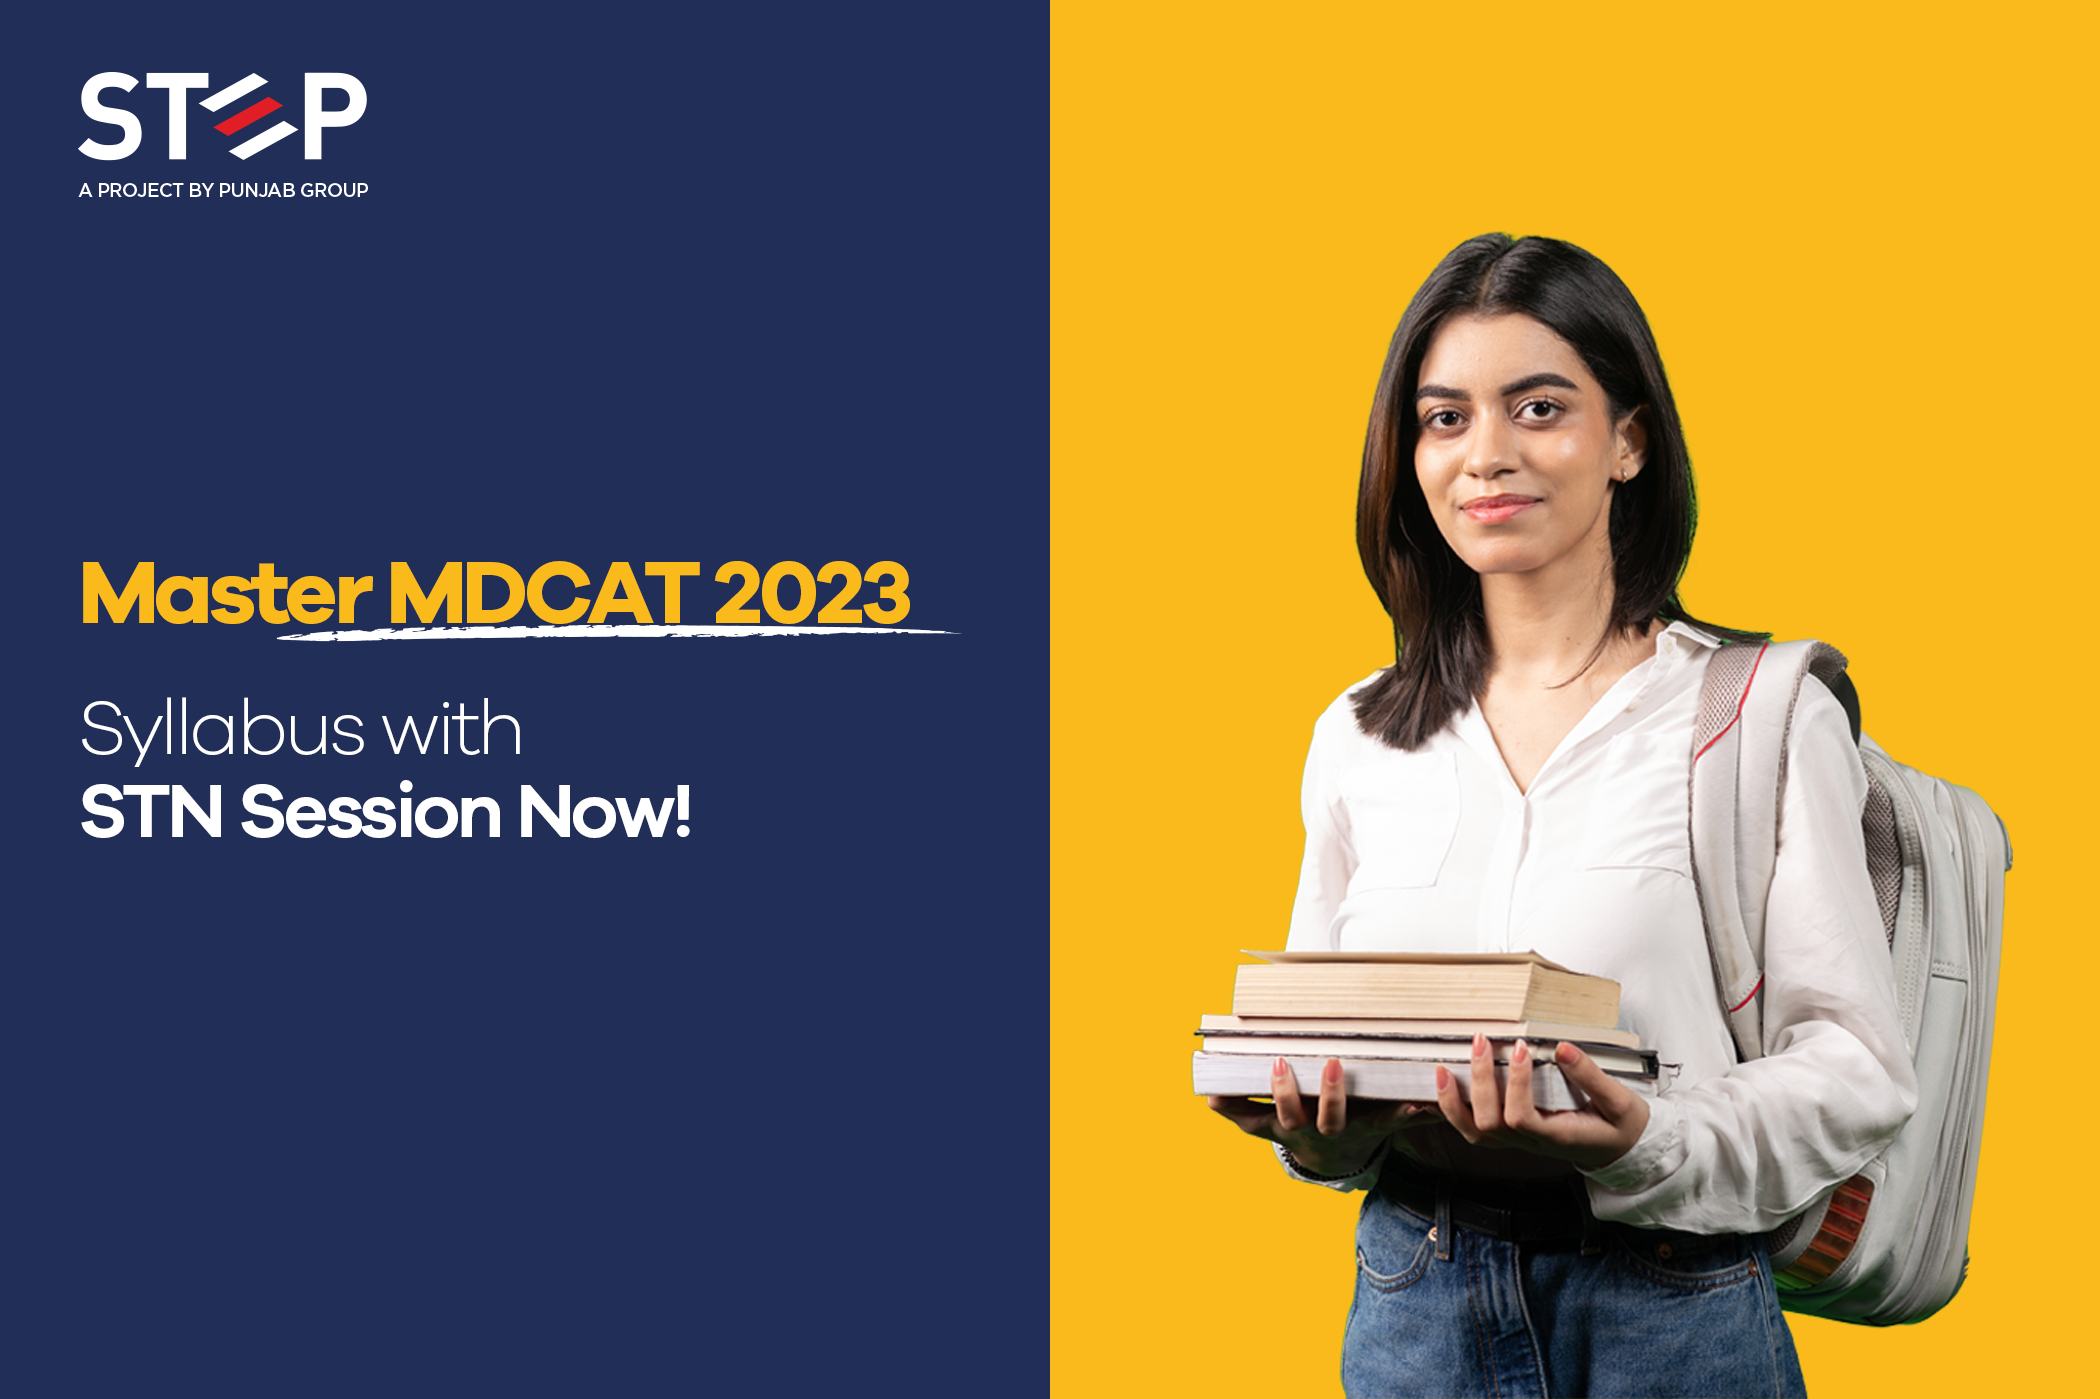 Master MDCAT 2023 Syllabus with STN Session Now!